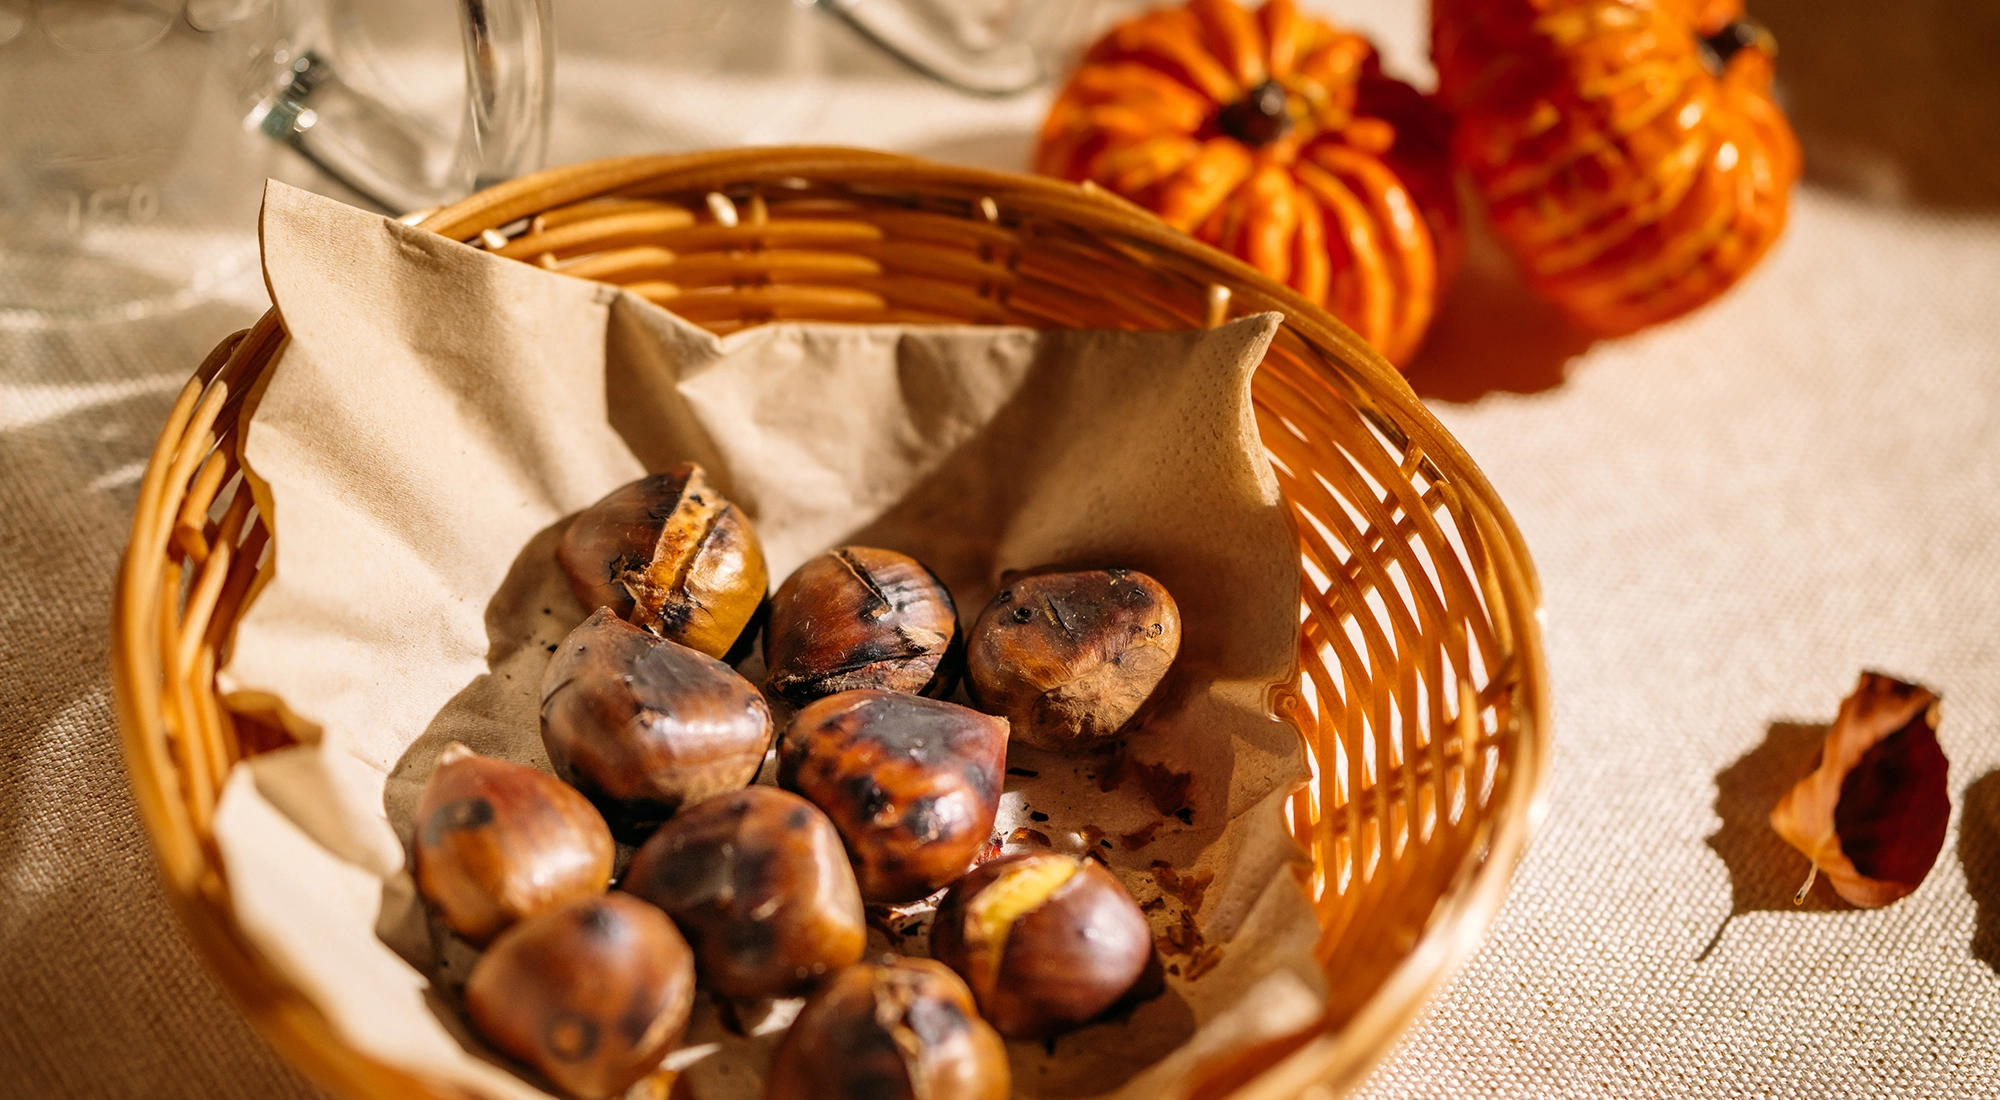 Chestnuts in a basket 